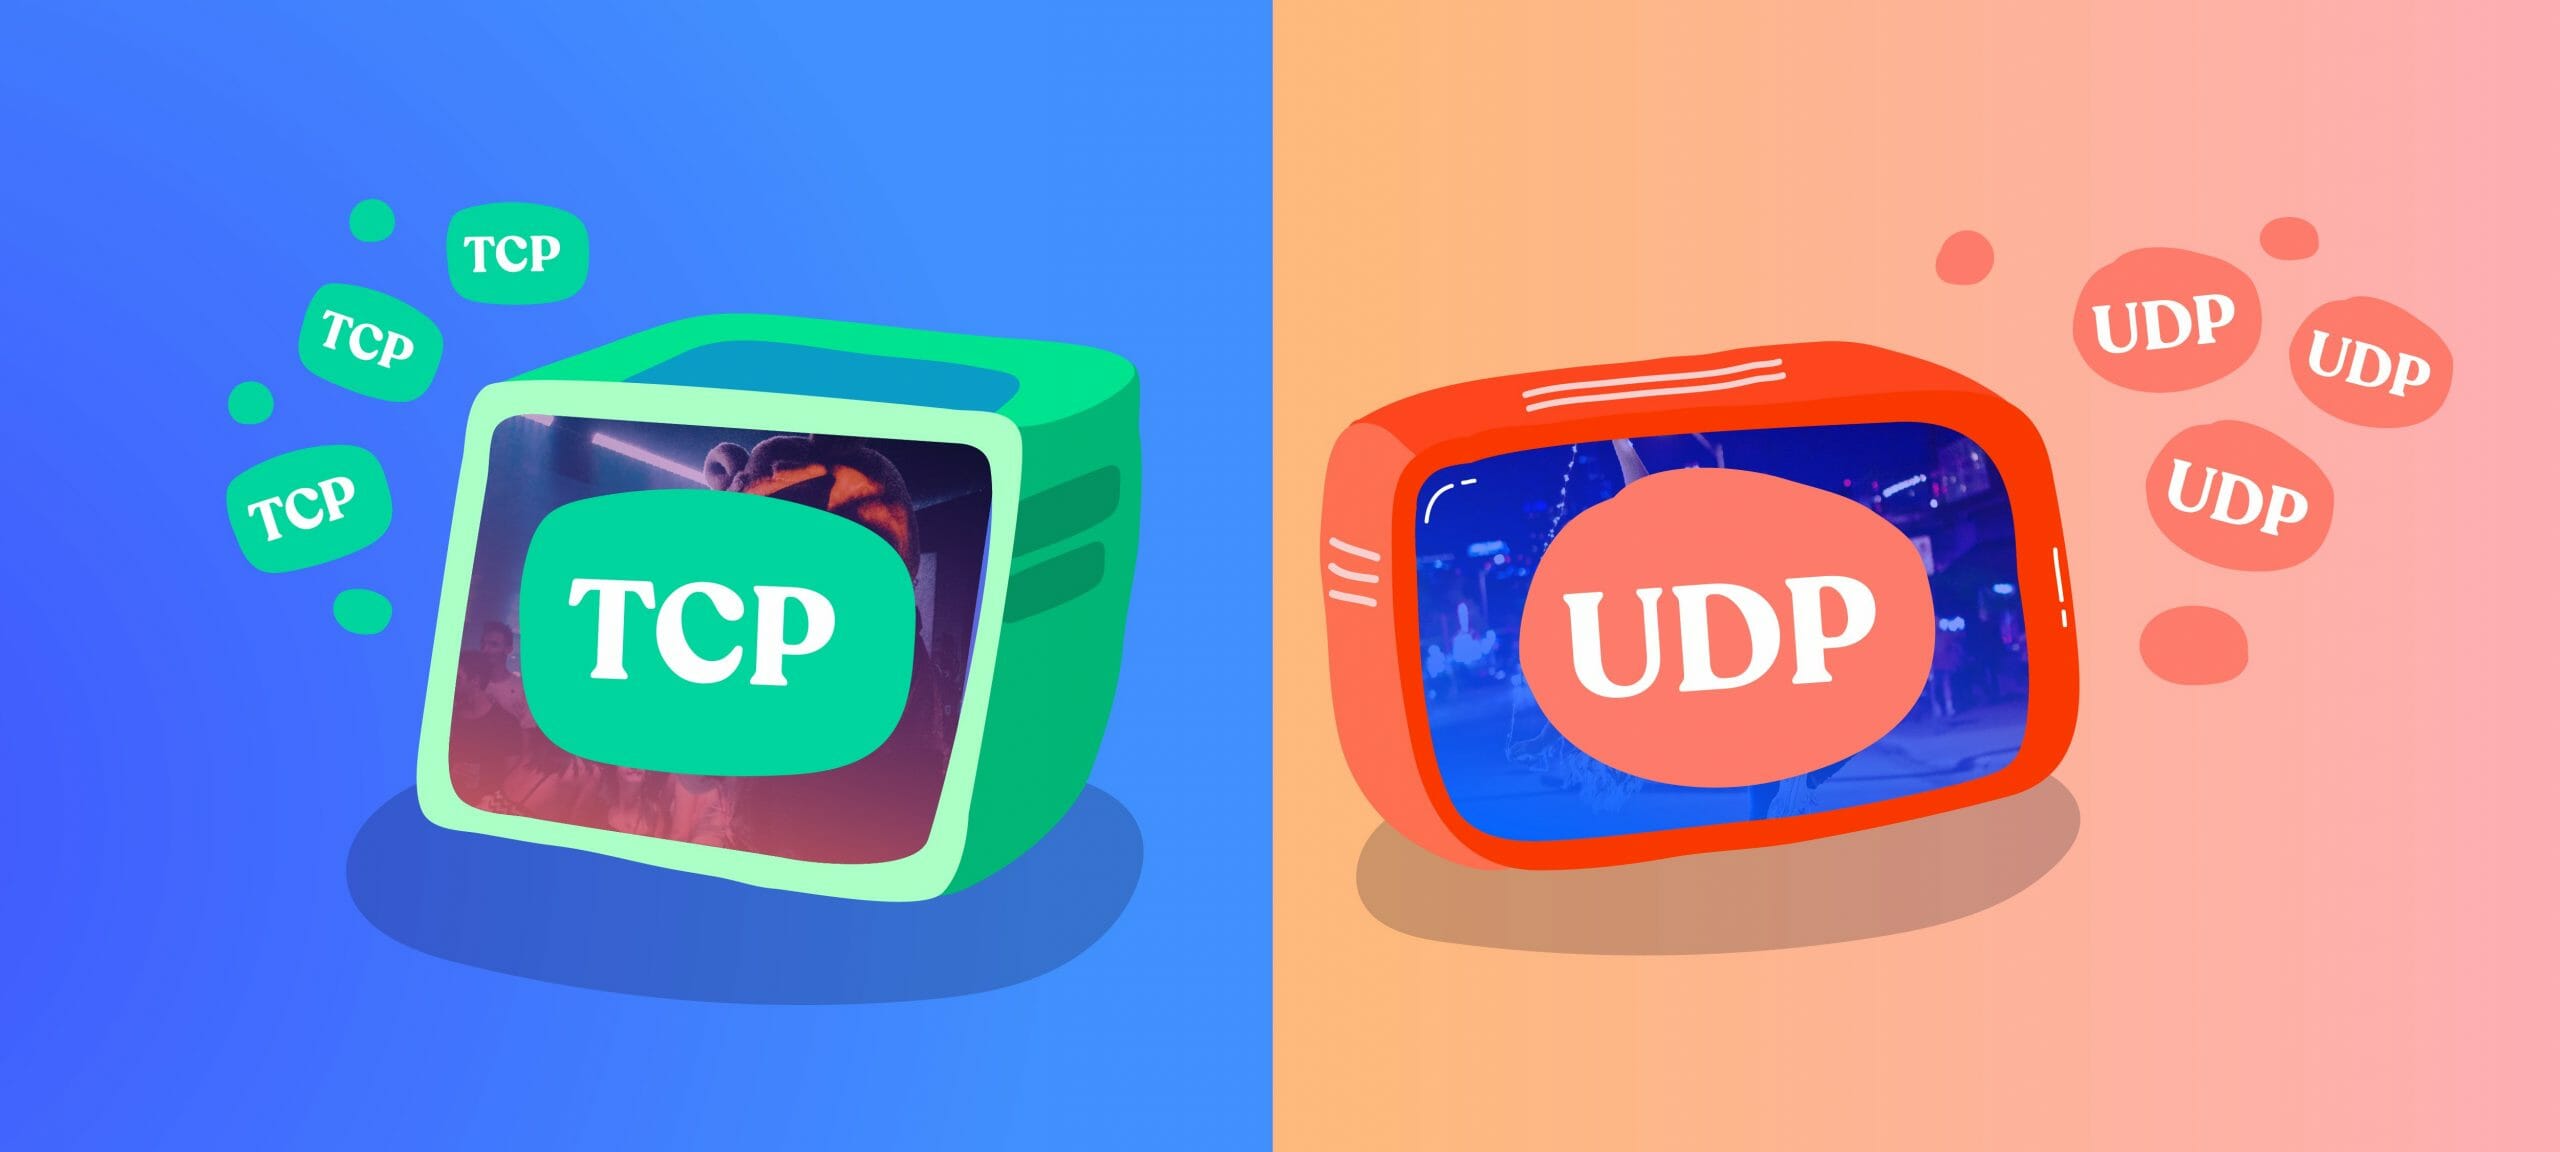 UDP vs TCP: What is the difference between TCP and UDP?